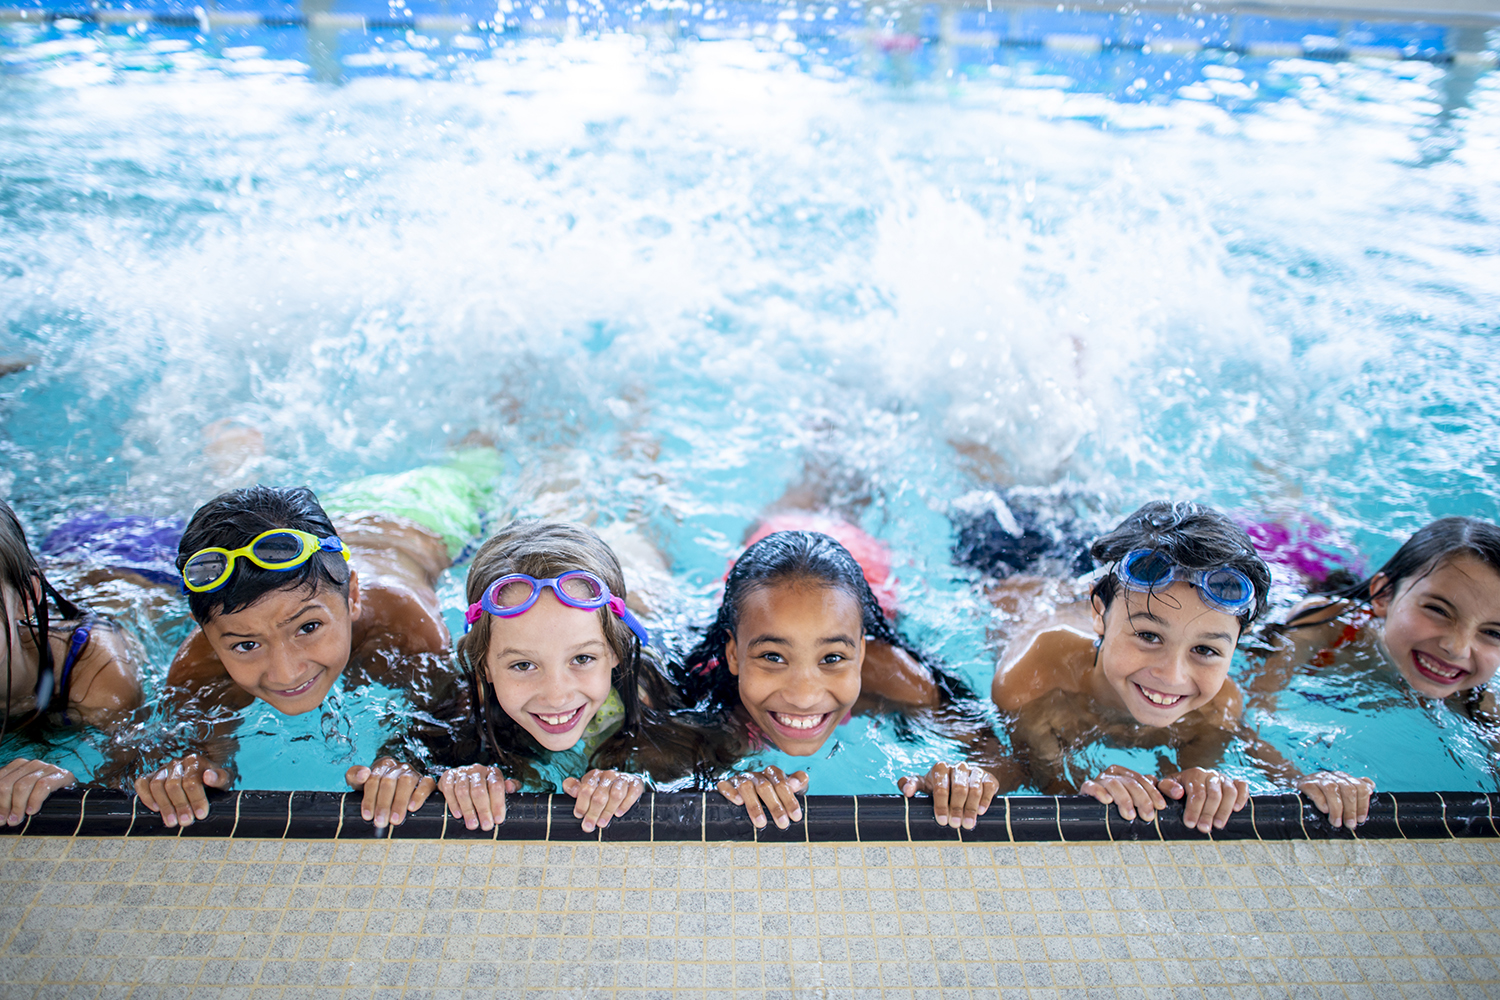 A group of elementary school children are at the pool. They are smiling and posing for the camera.